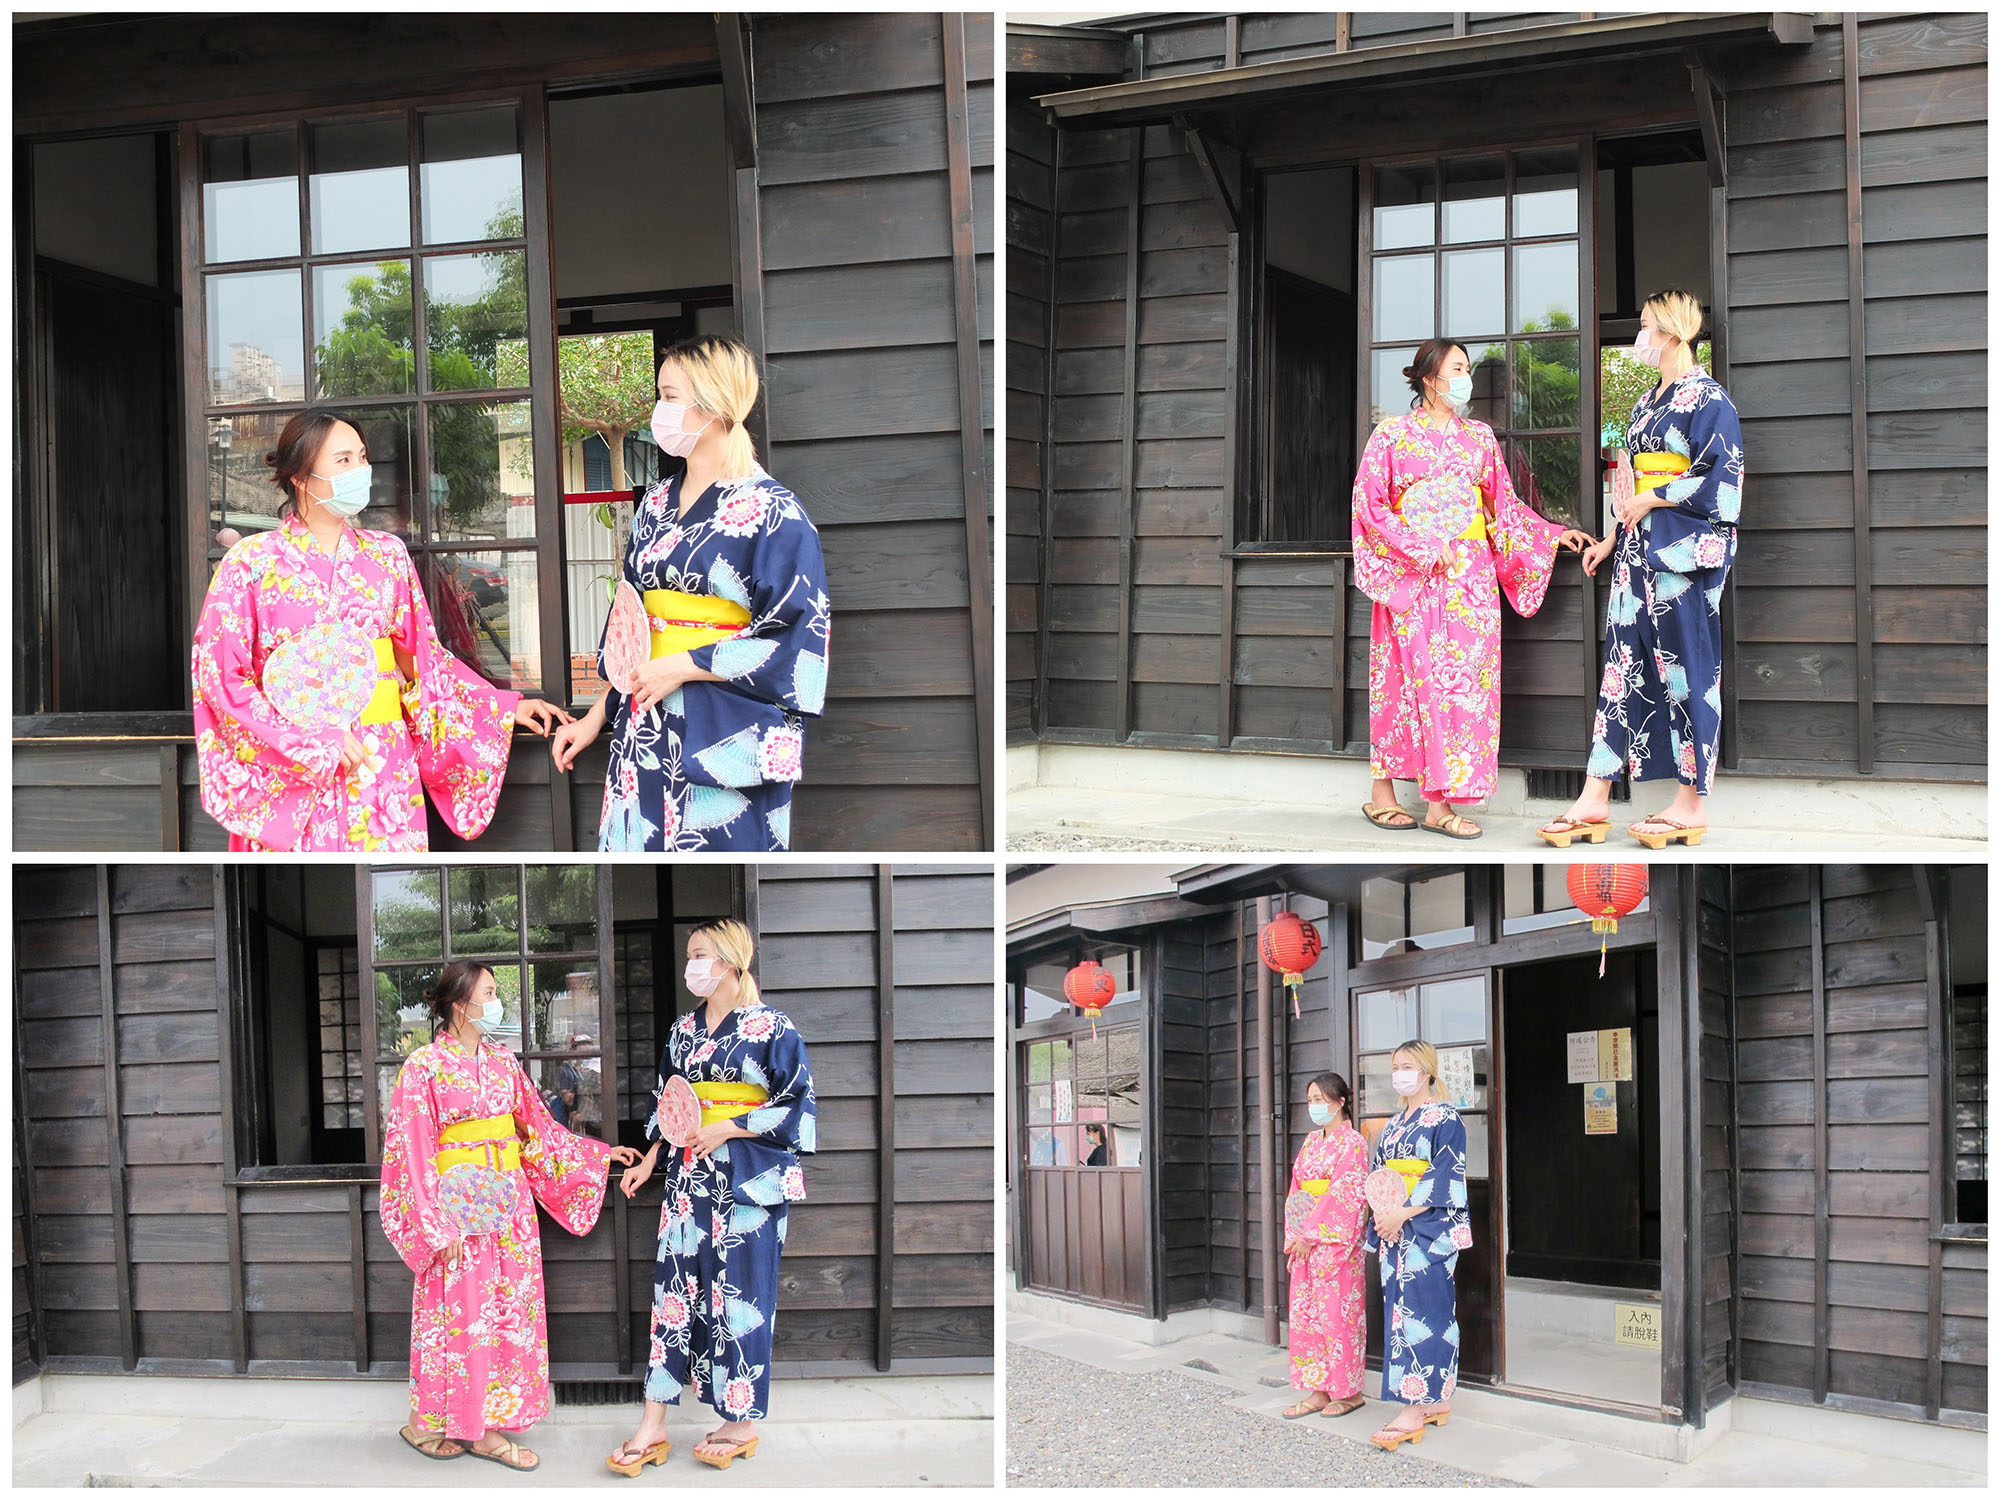 free experience: the opportunity to rent and wear a kimono